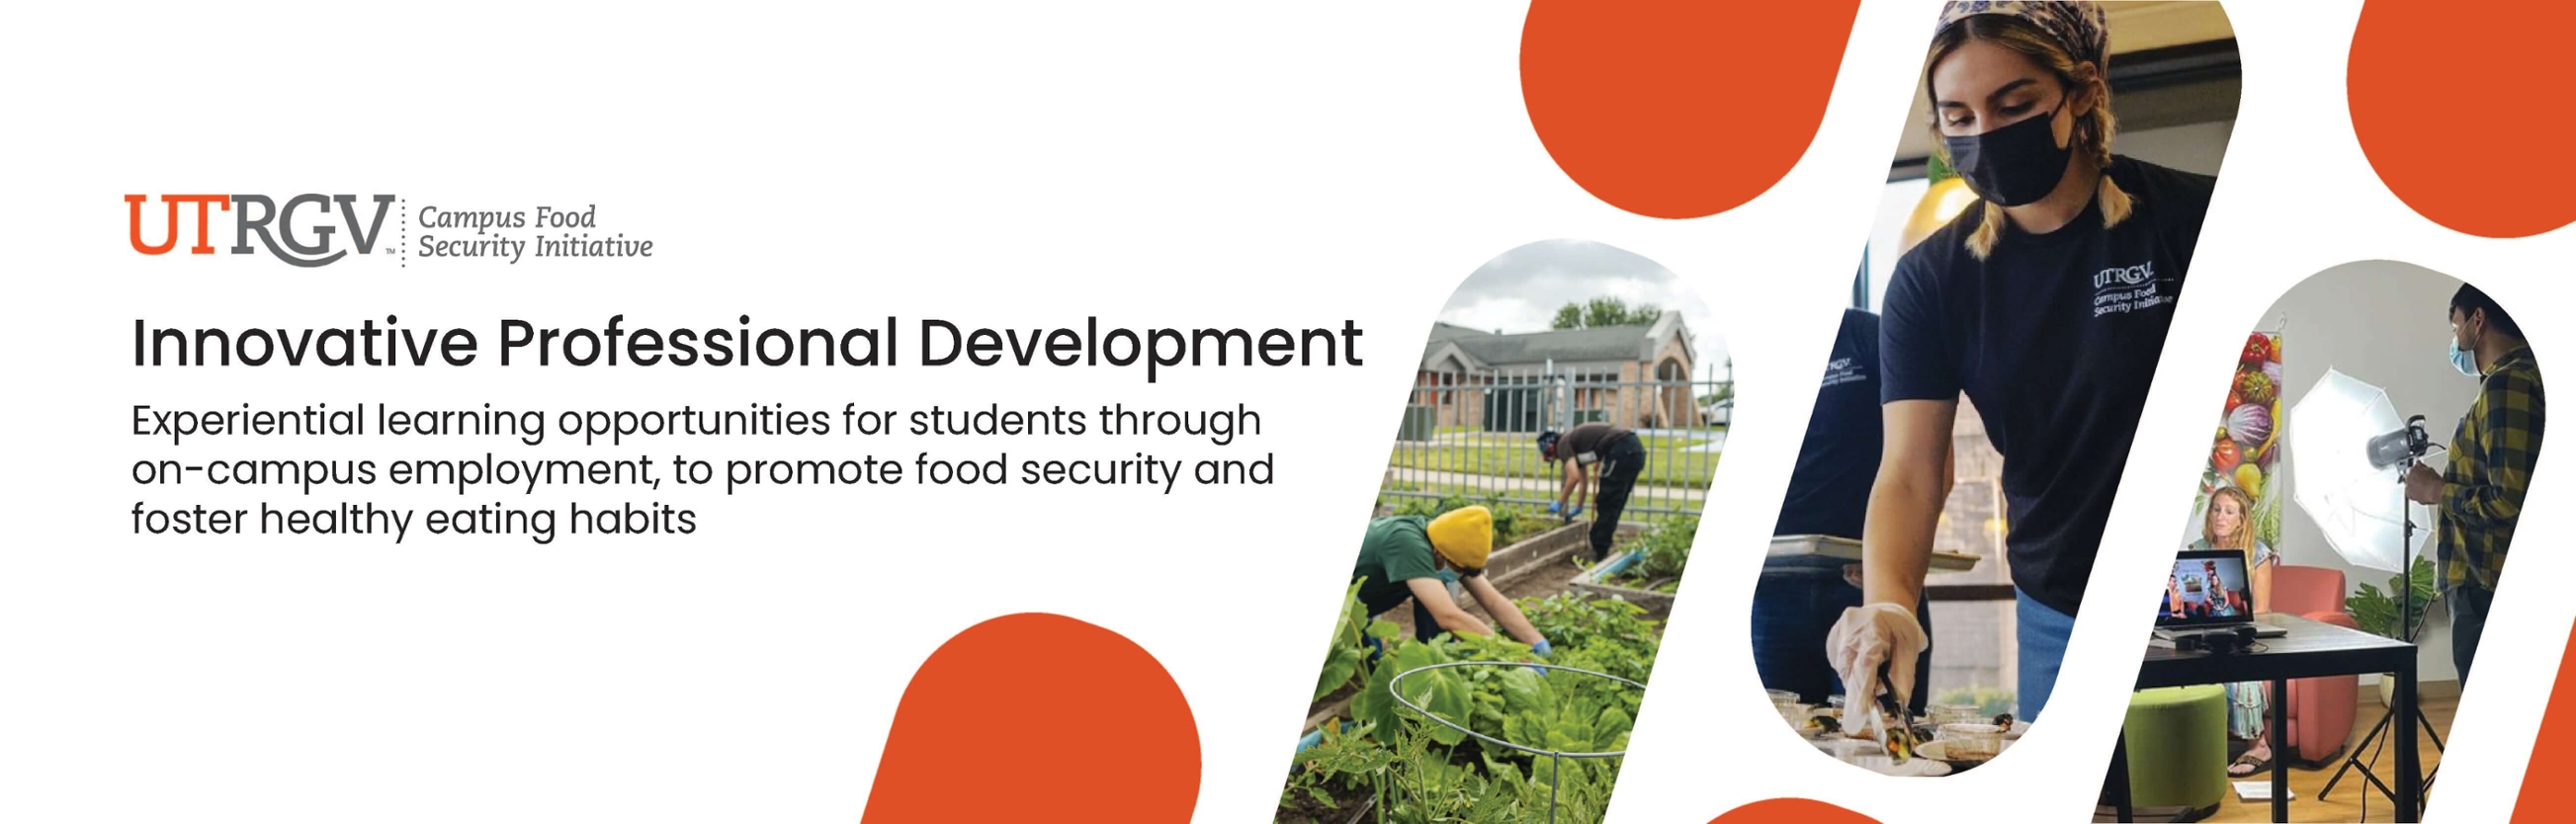 The University of Texas Rio Grande Valley's Campus Food Security Initiative - Innovative Professional Development - Experiential learning opportunities for students through on-campus employment, to promote food security and foster healthy eating habits.